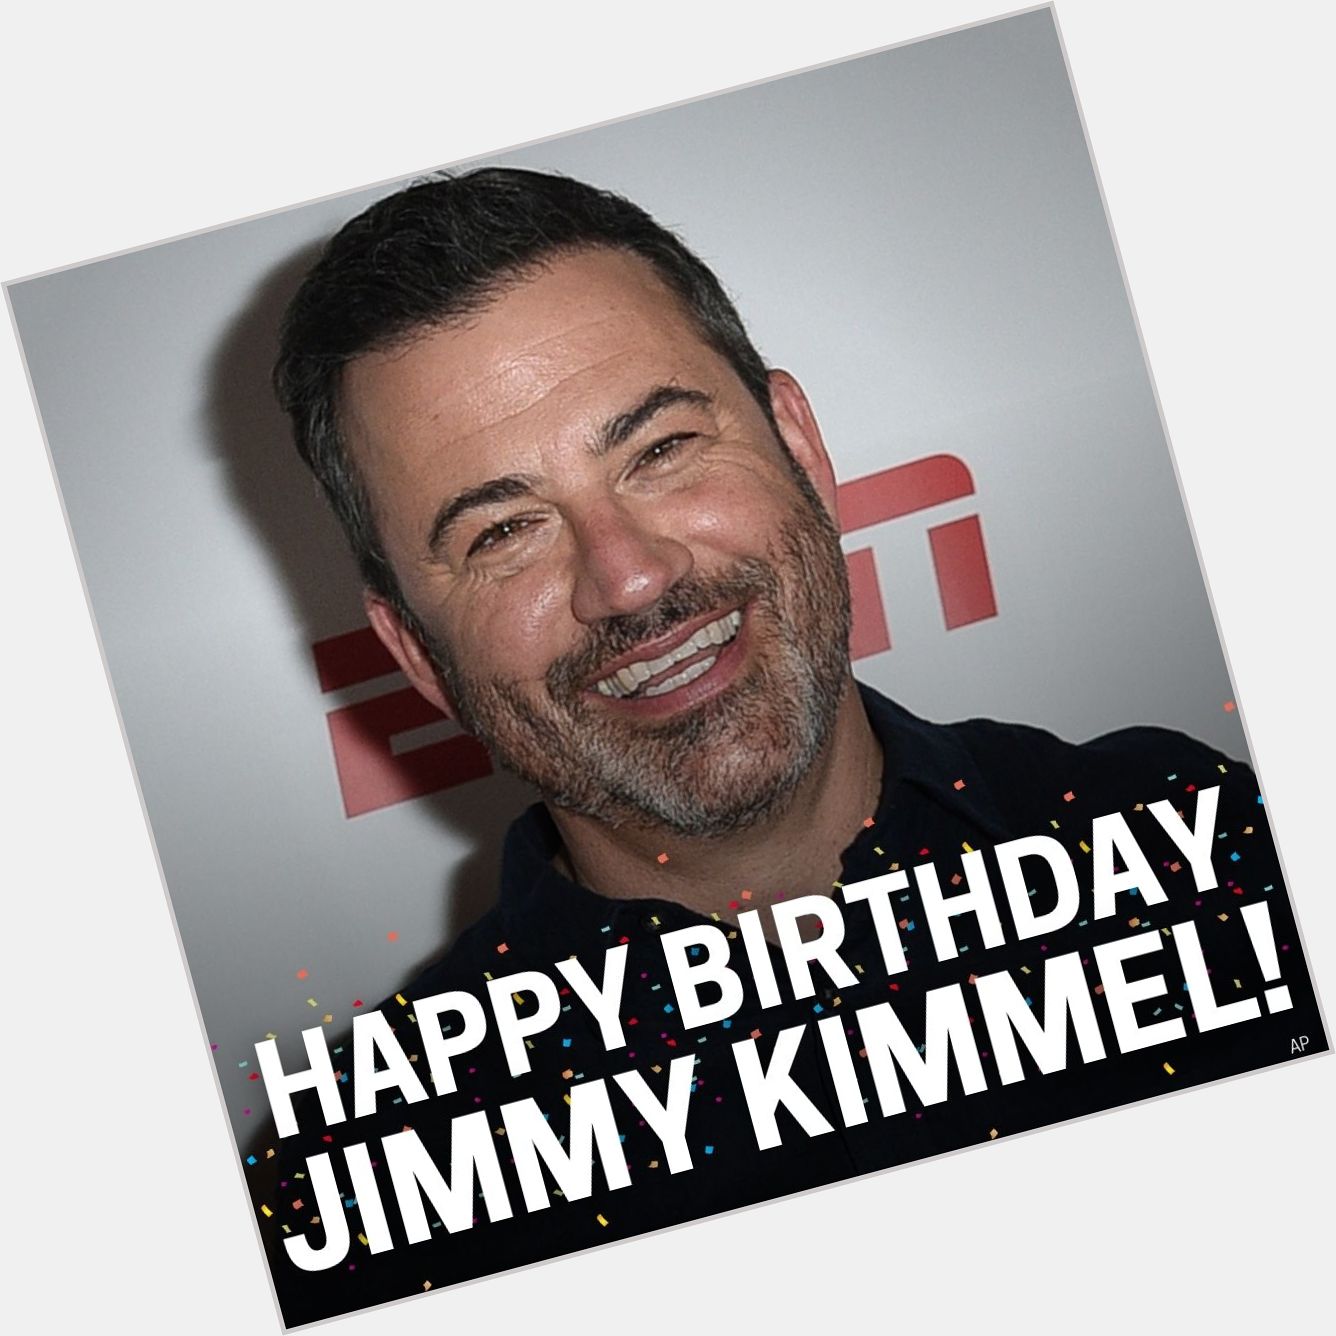 Who is your favorite late night tv host?

Happy 54th birthday to Jimmy Kimmel! 